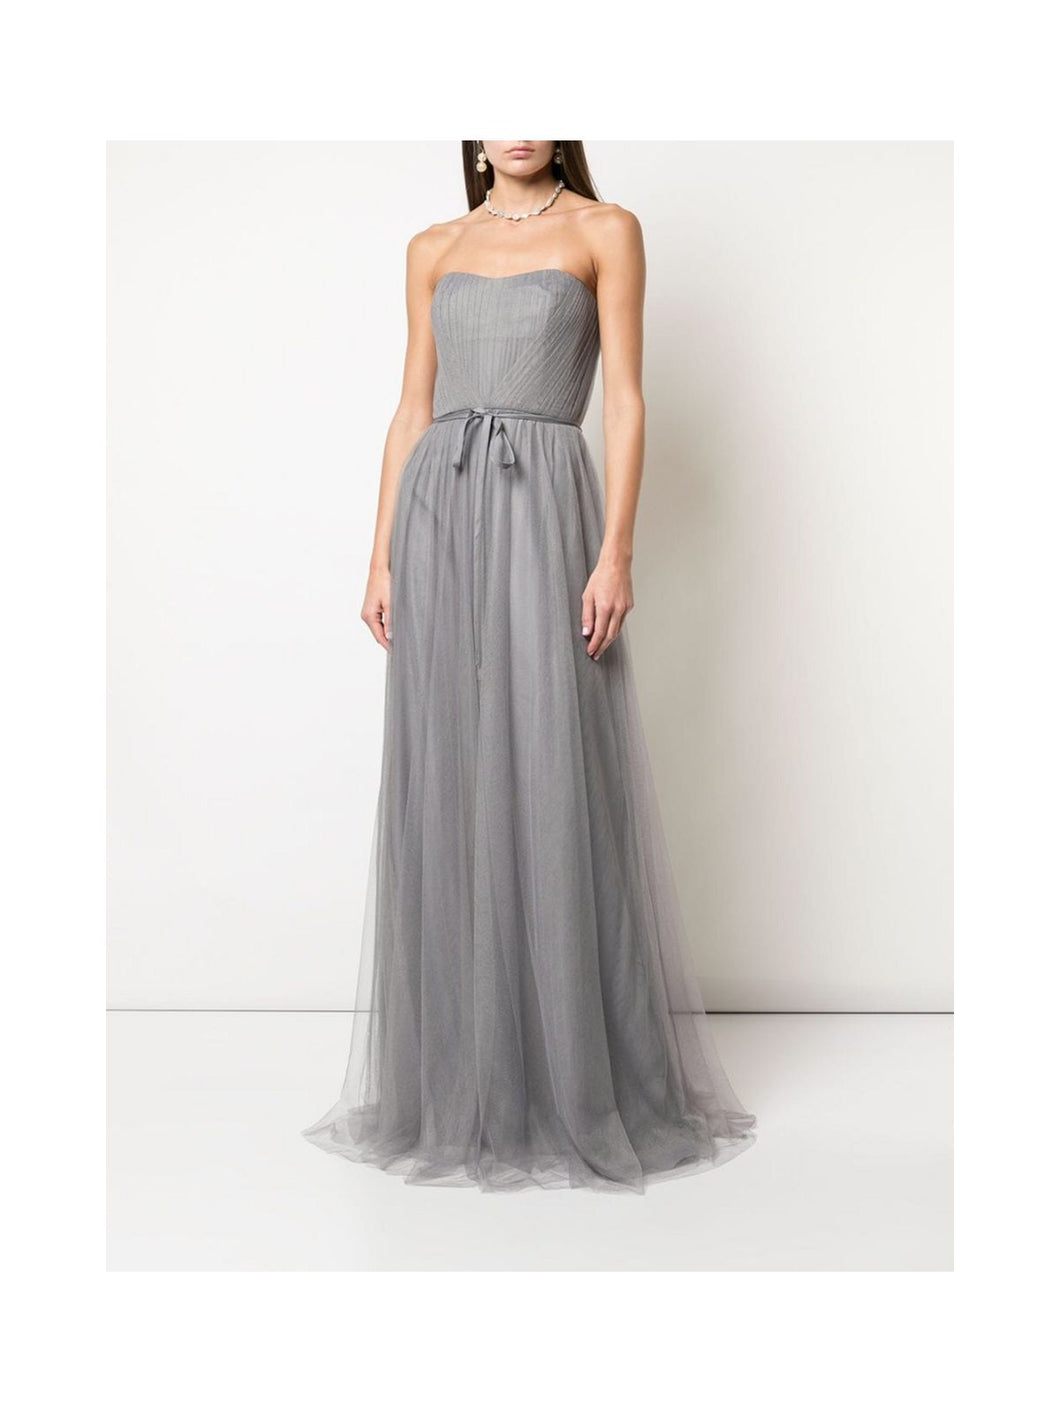 Strapless Tulle Draped Gown